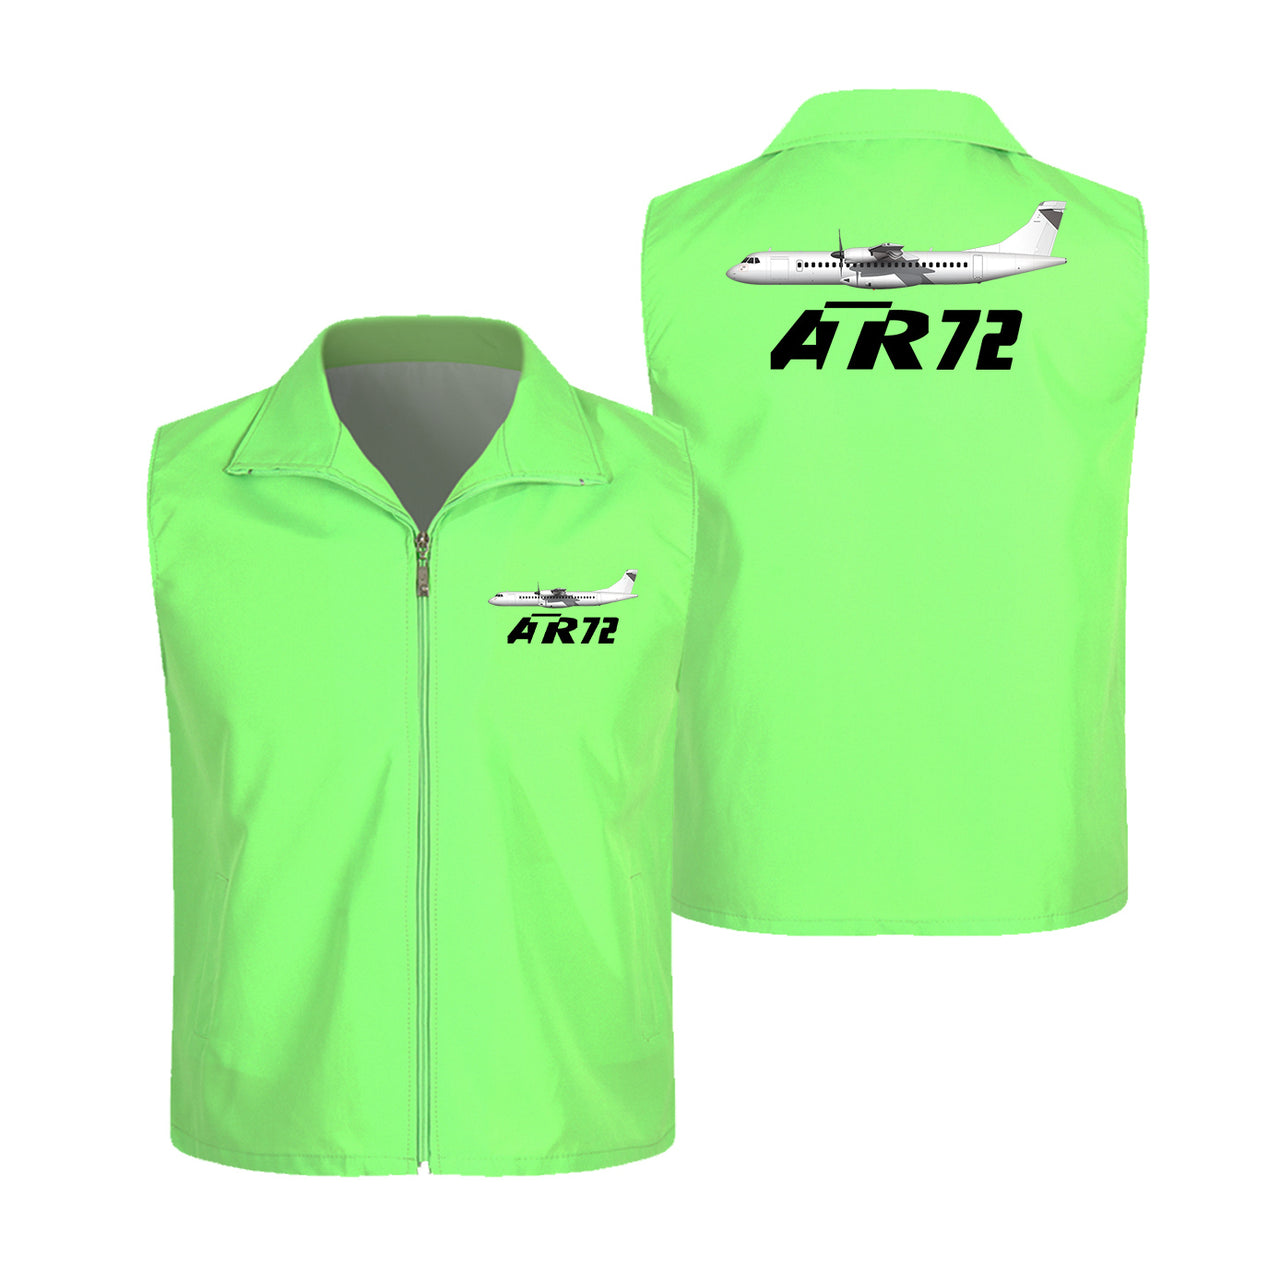 The ATR72 Designed Thin Style Vests